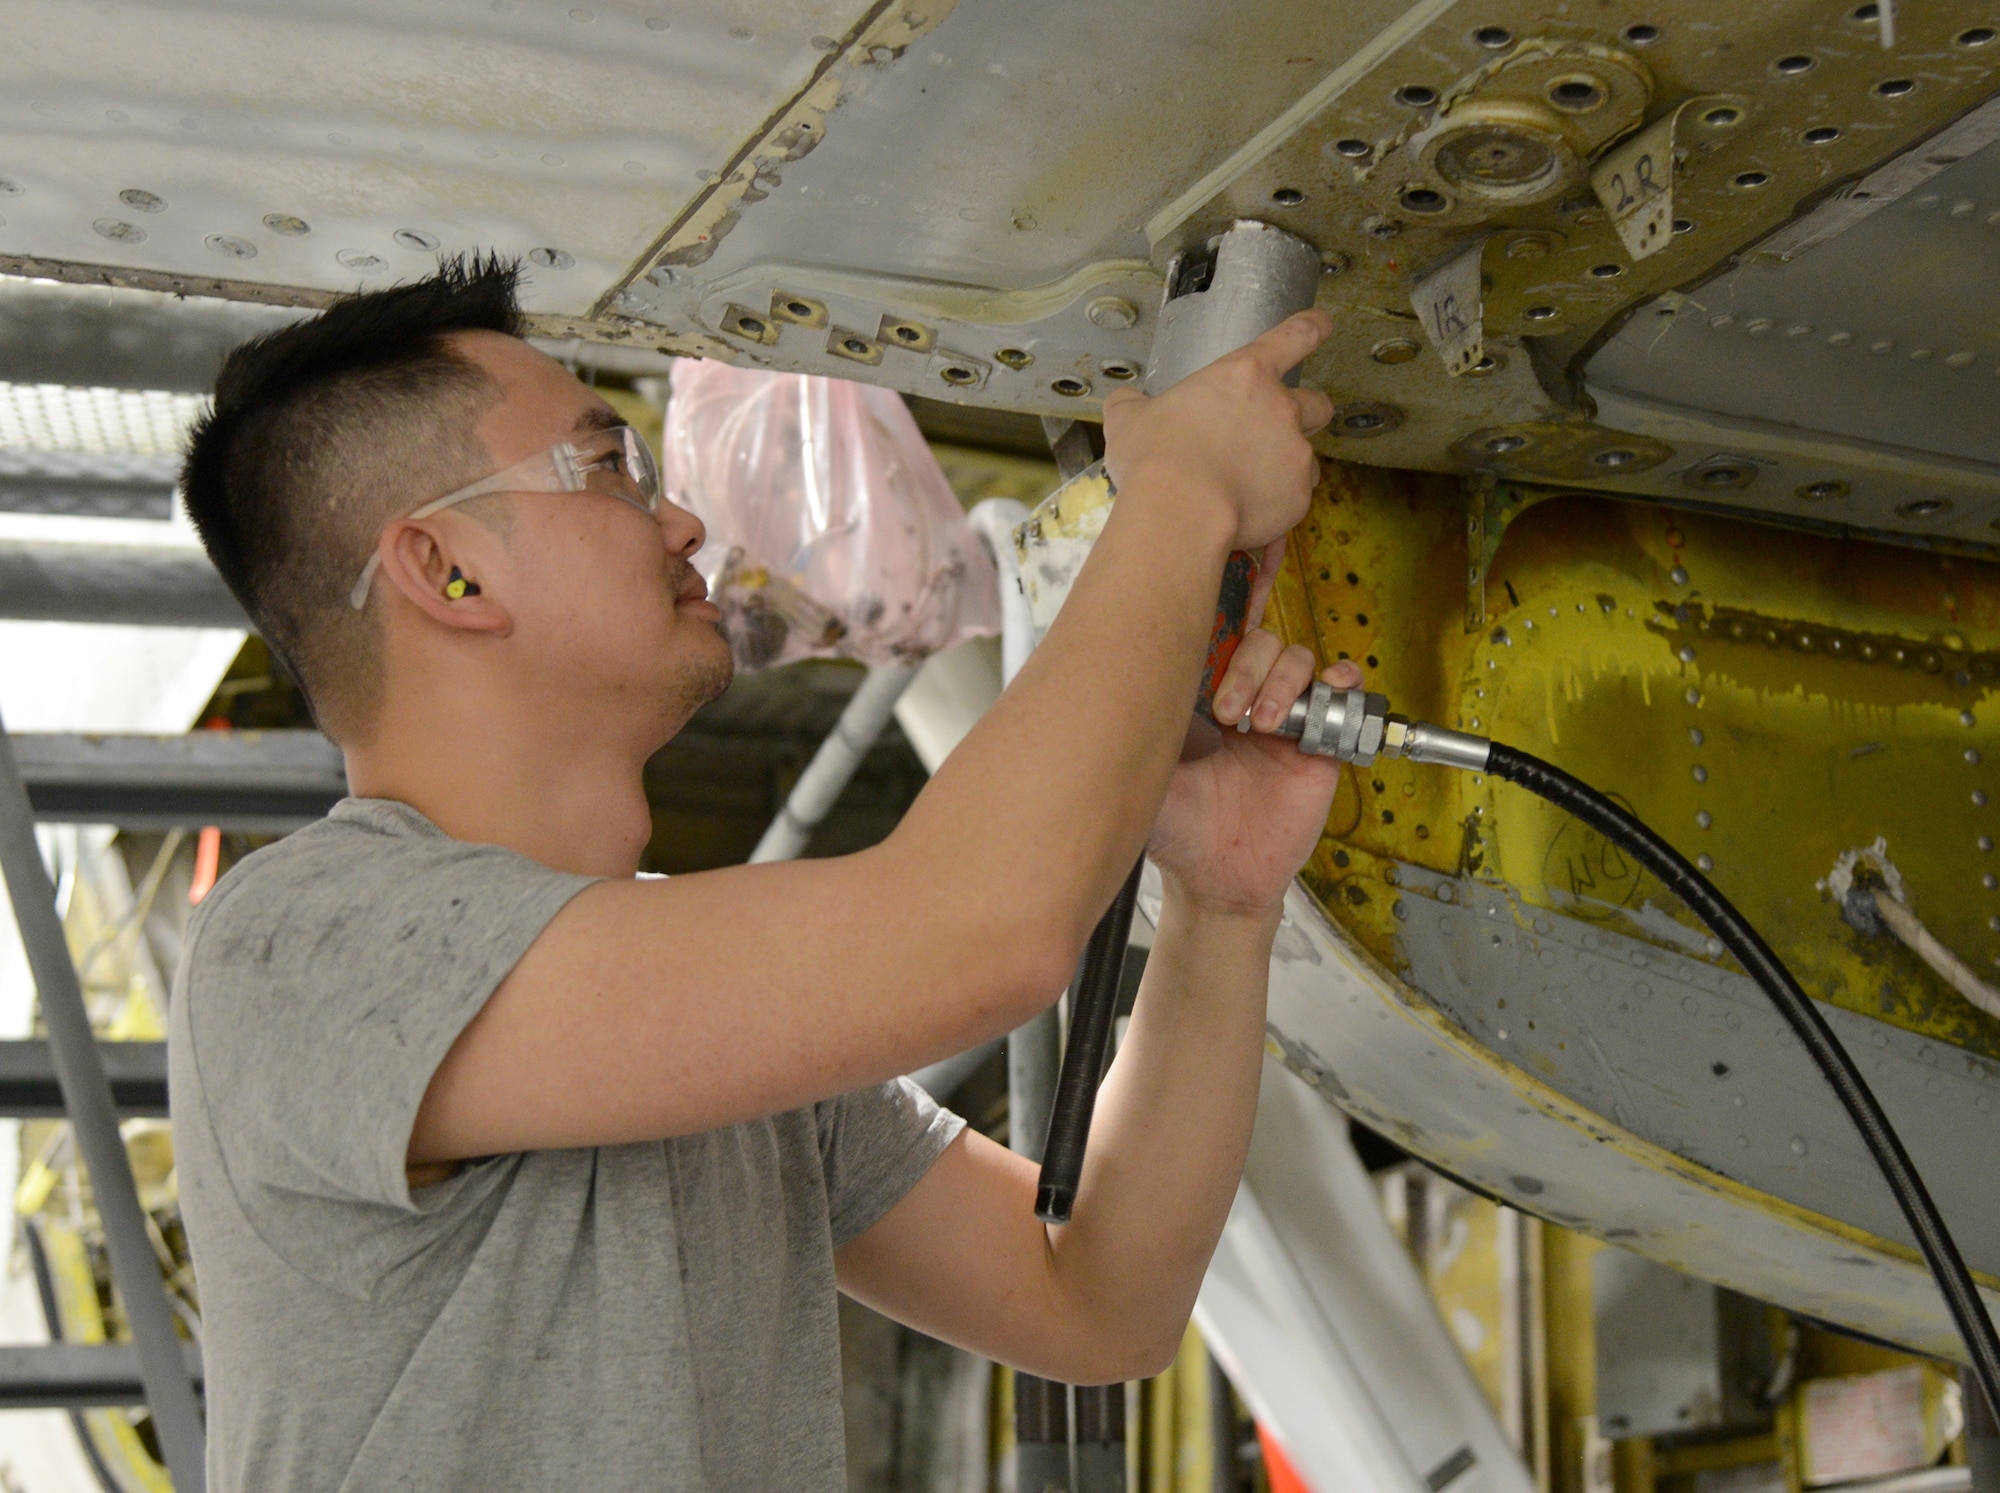 Jet Le, a sheetmetal mechanic with the 545th Aircraft Maintenance Squadron, pulls out a bolt on the boomerang section of the terminal of a KC-135 Stratotanker. Mr. Le has worked at Tinker for two years after completing the Pathway intern program through Francis Tuttle Technology Center.